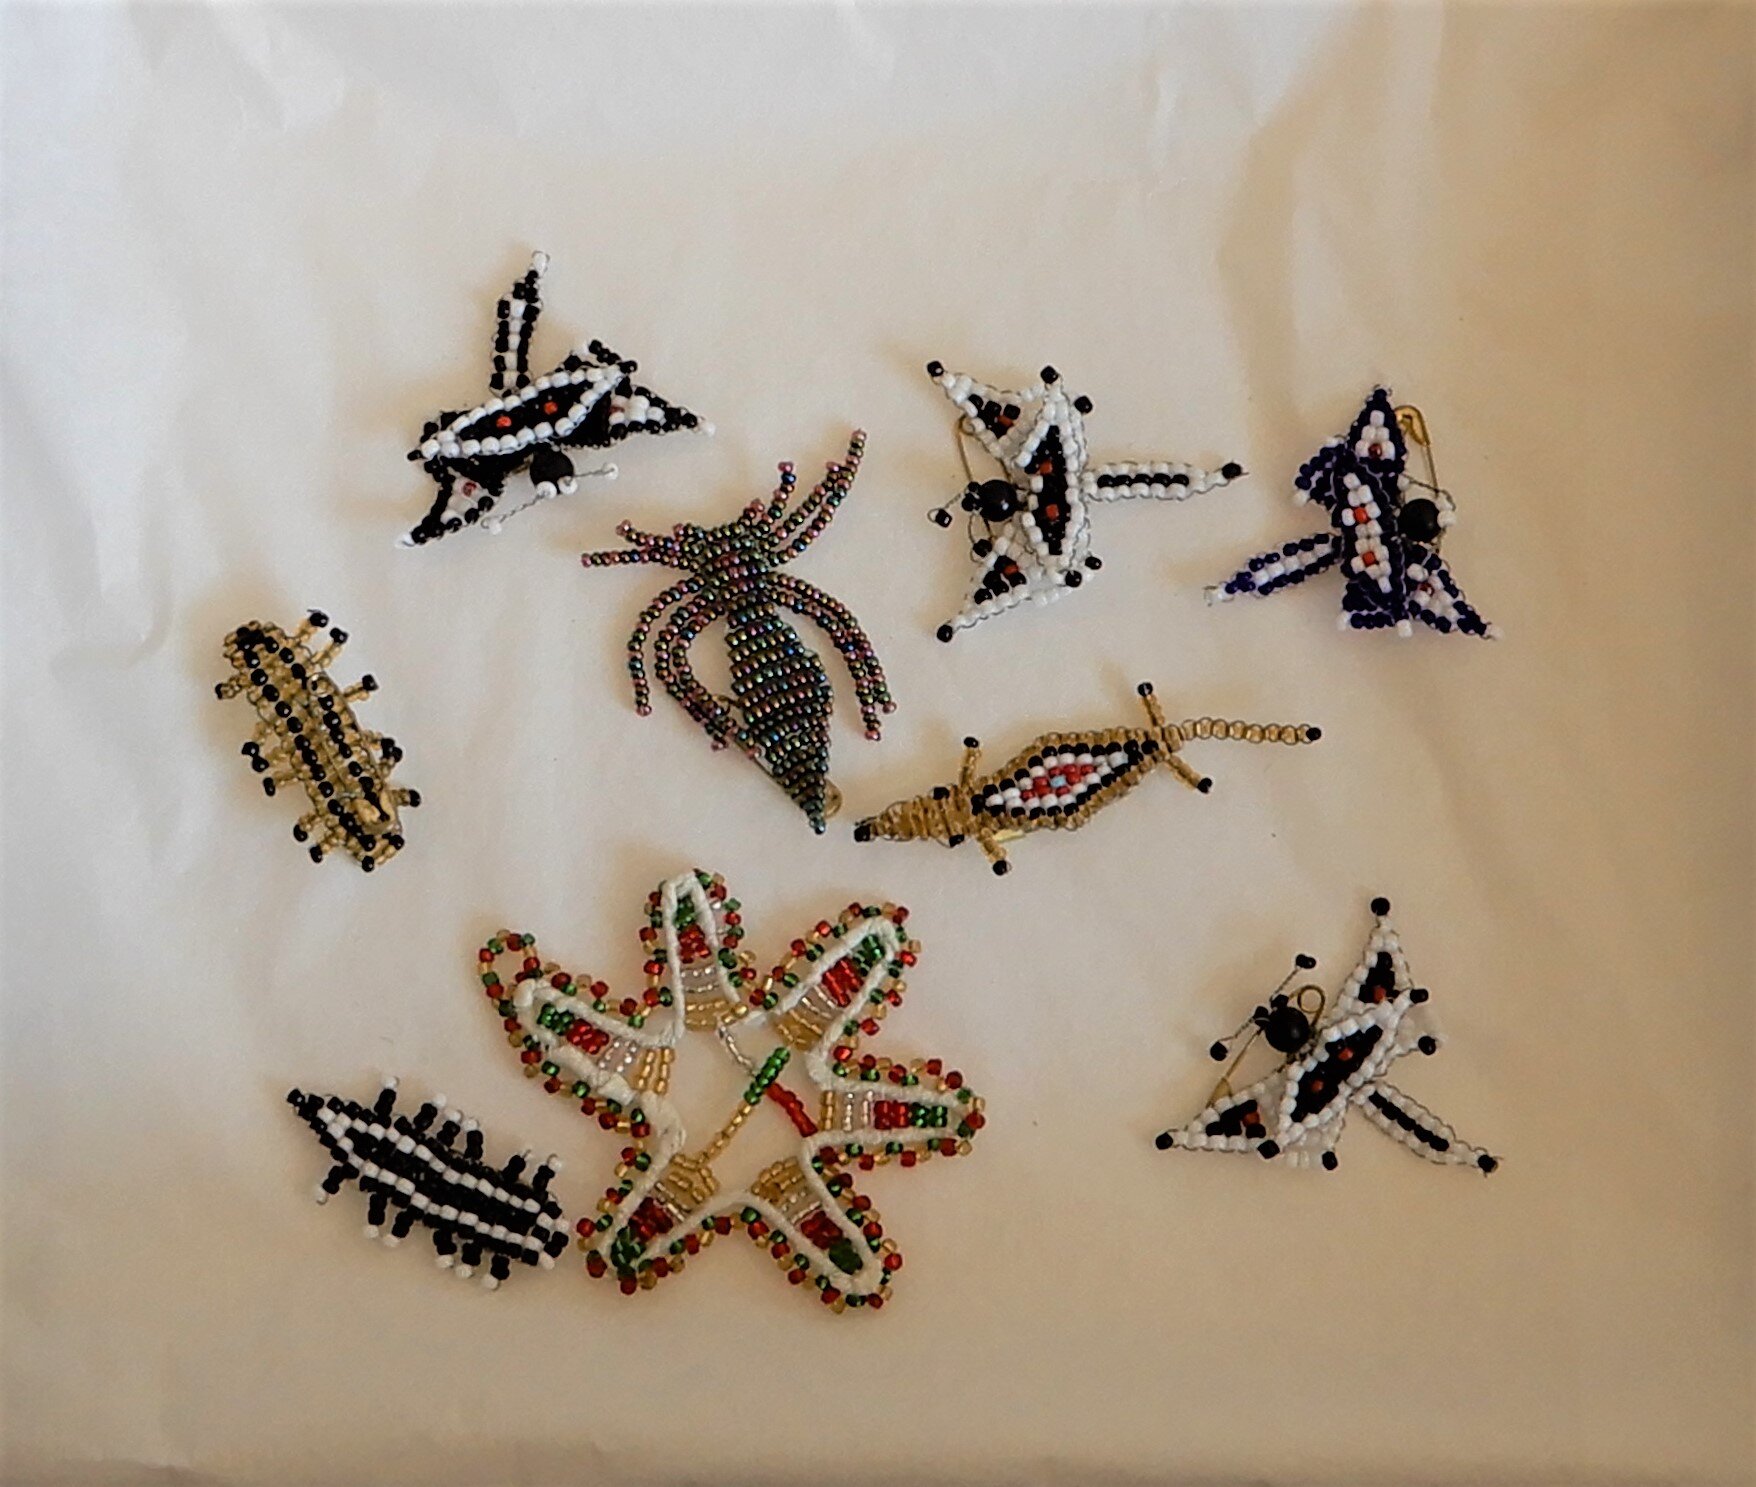  A display of nine beaded badges in the shape of dragonflies, caterpillars and crocodiles. 